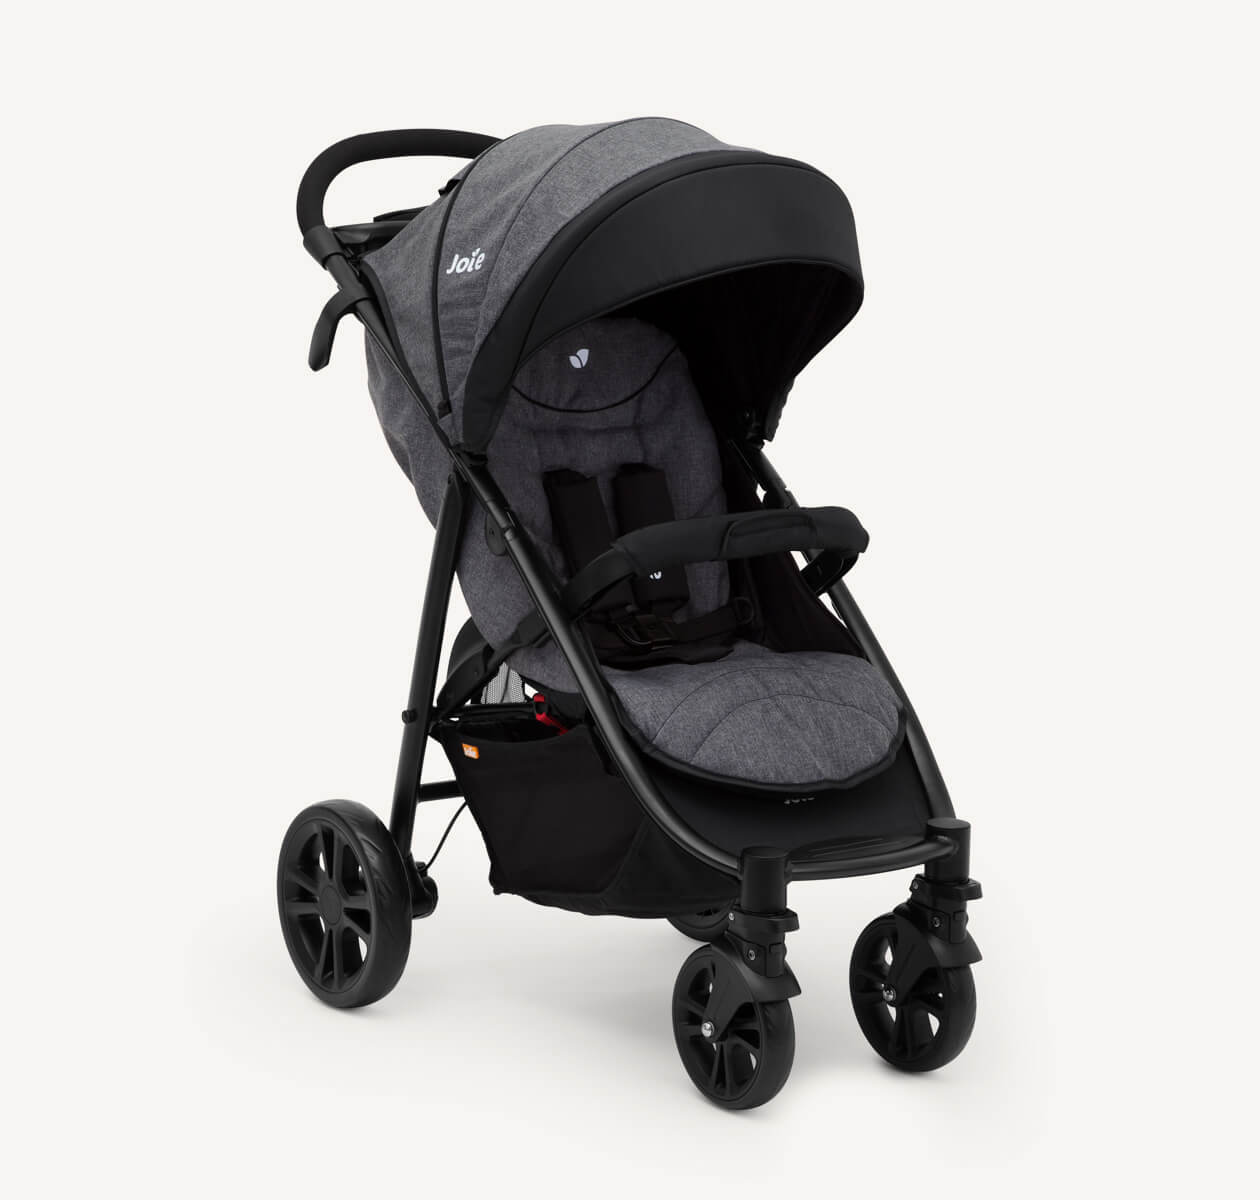 A black Joie Litetrax 4 stroller, facing toward the right at an angle.